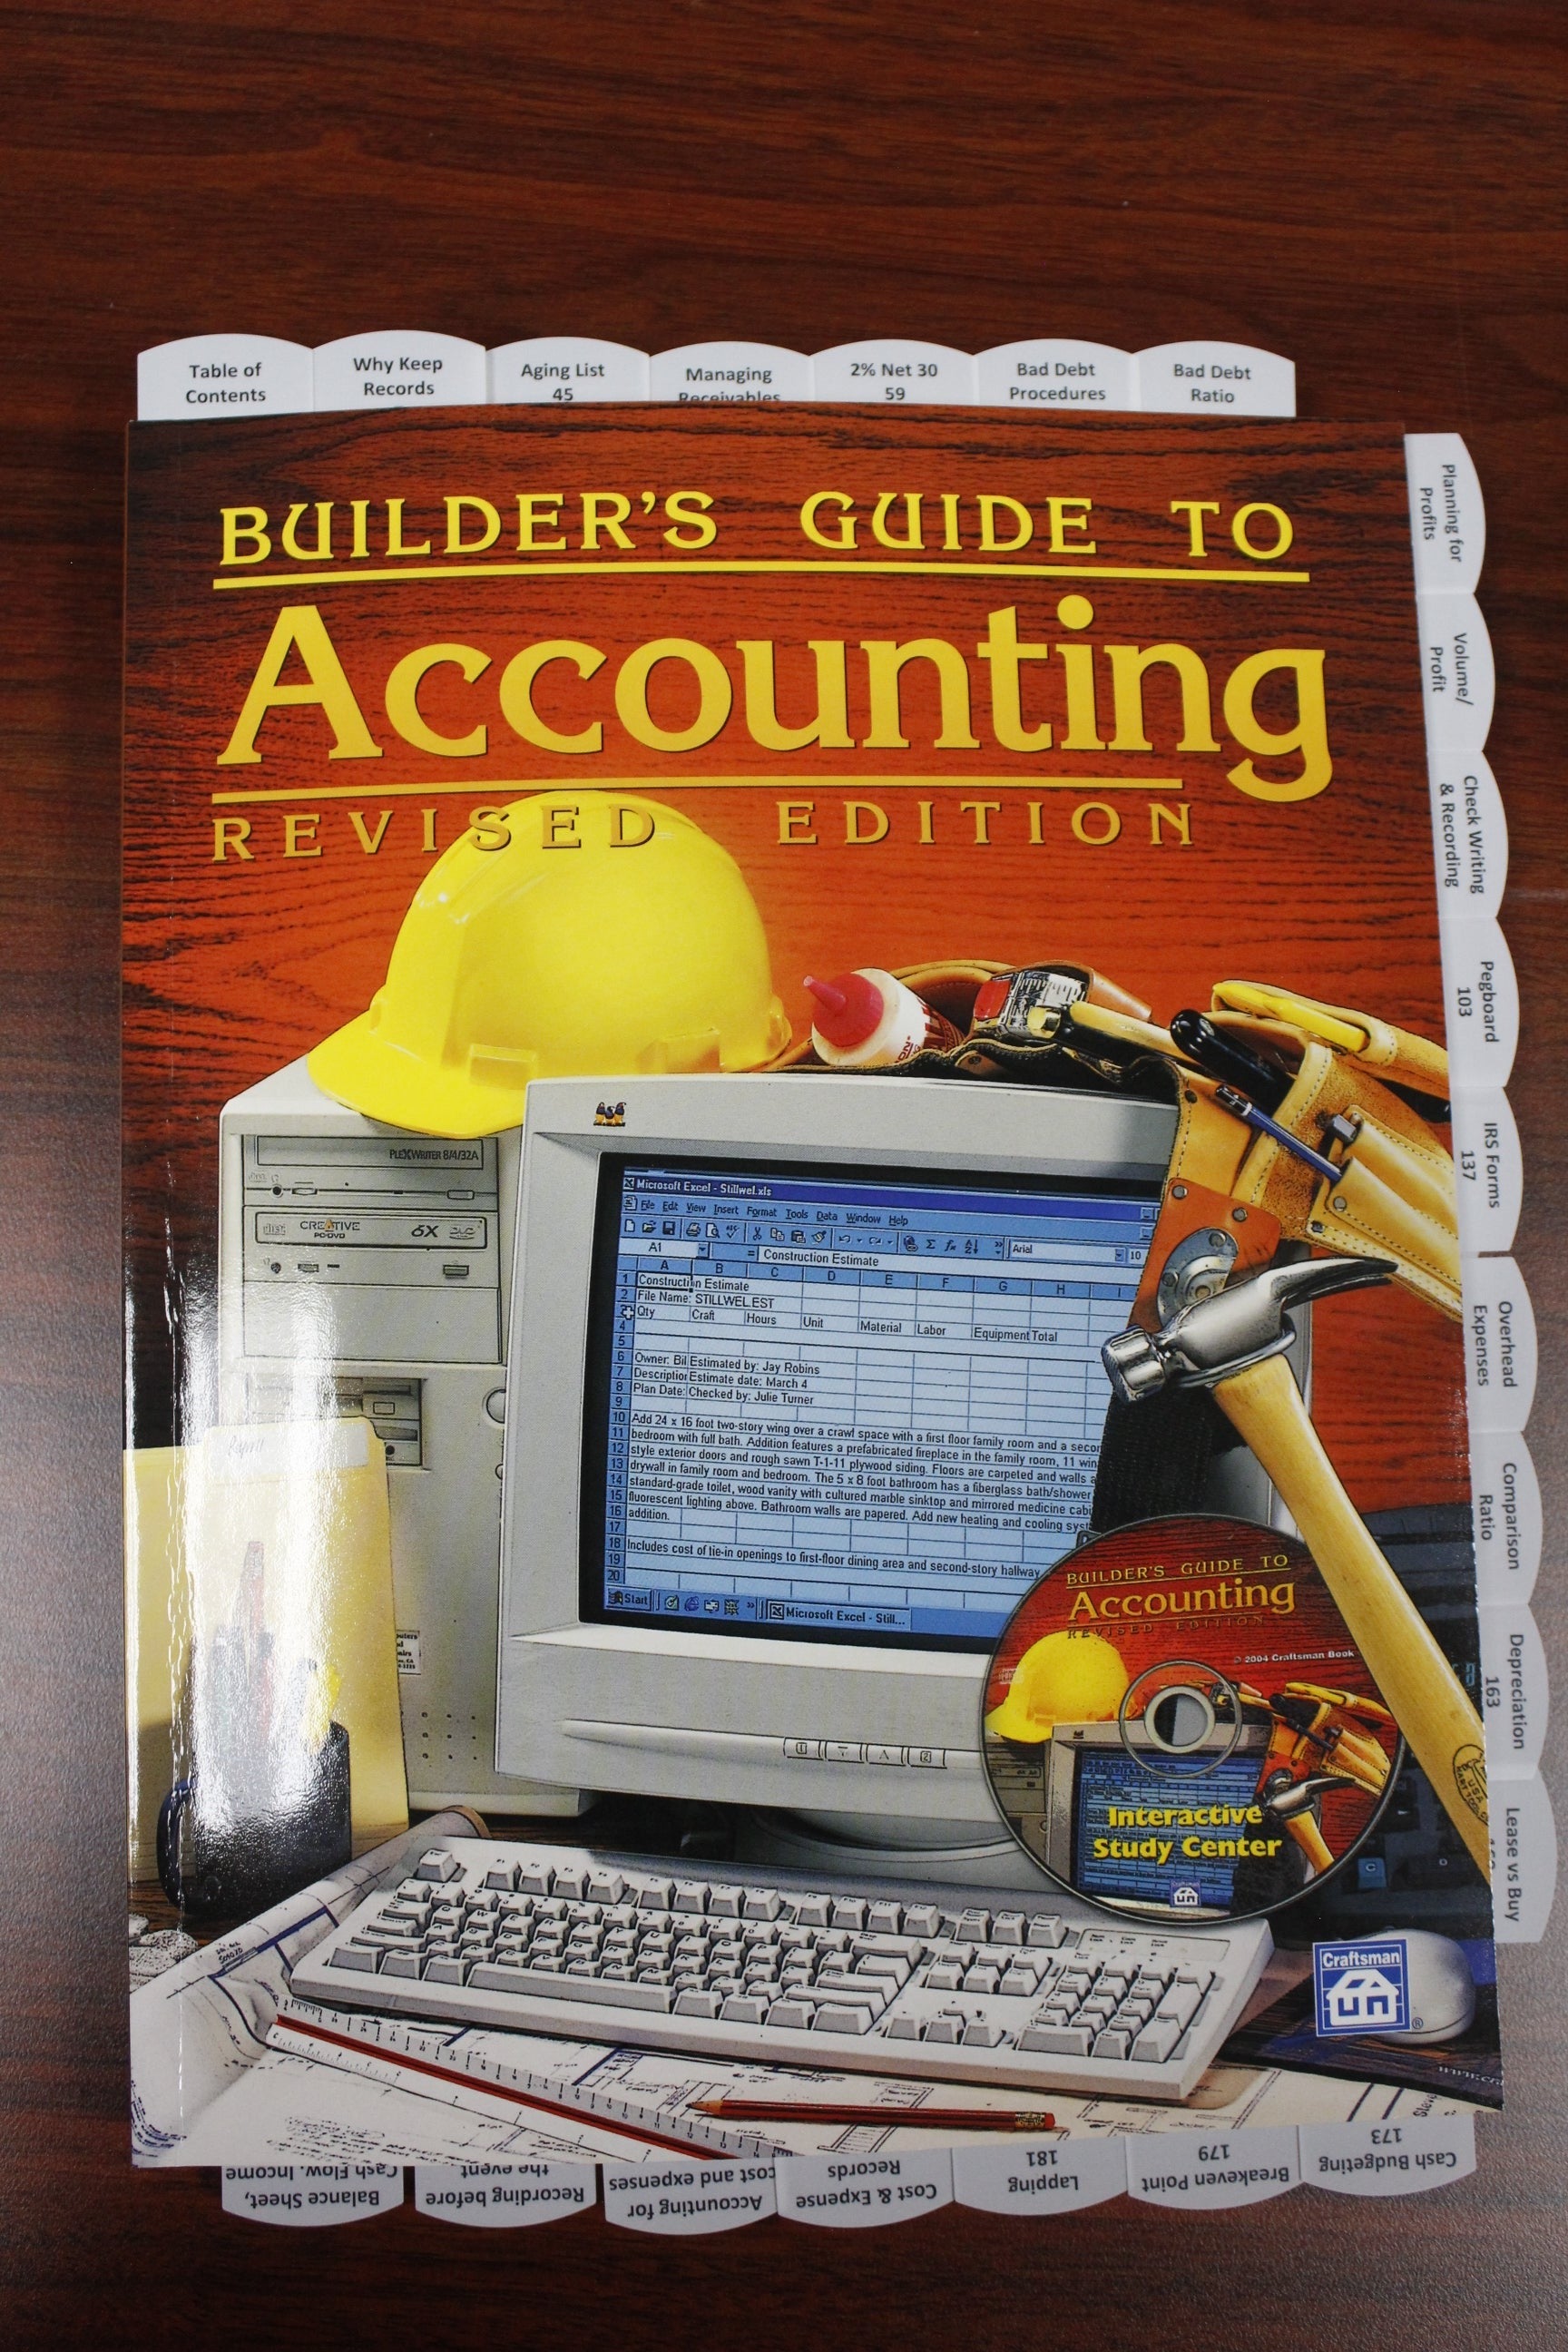 Florida Business and Finance Contractor Exam Book Options